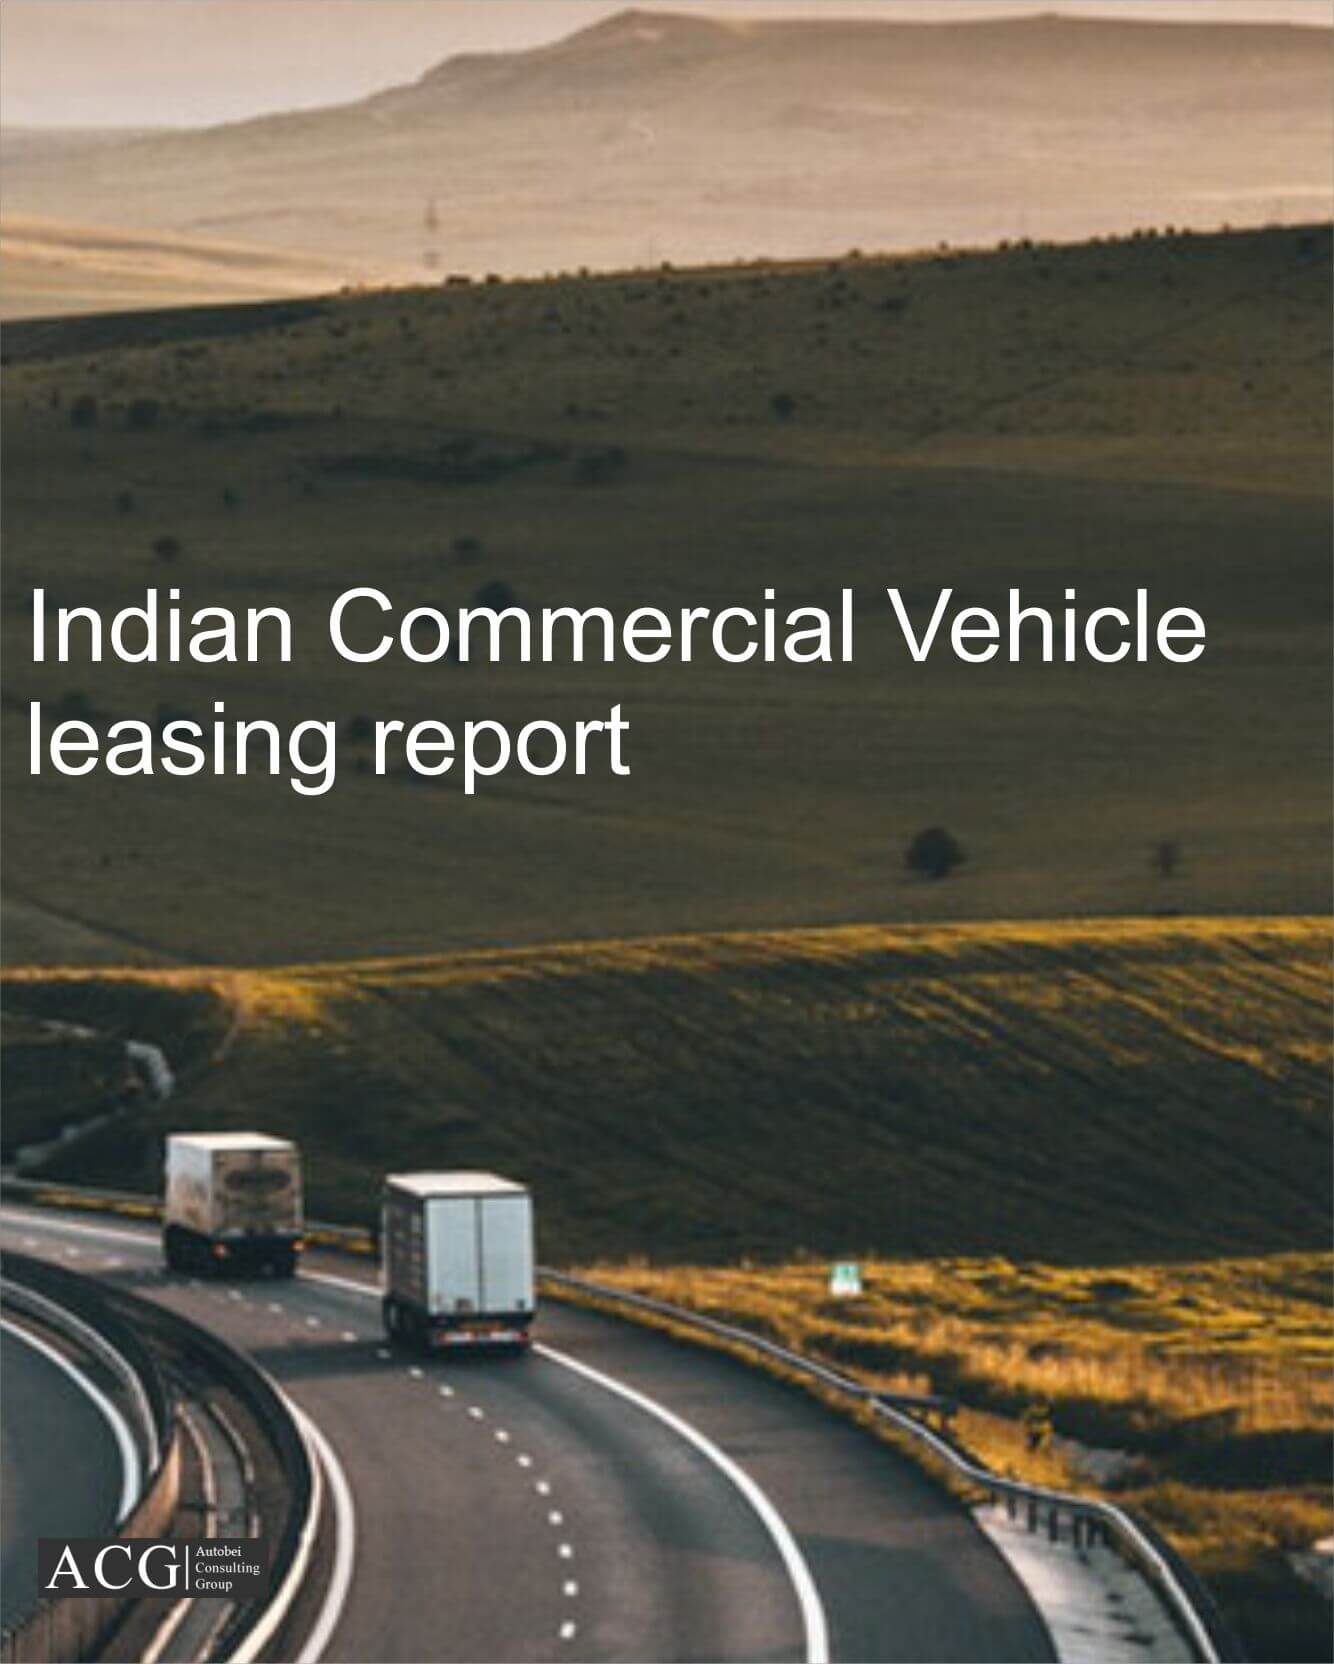 Indian Commercial Vehicle leasing report